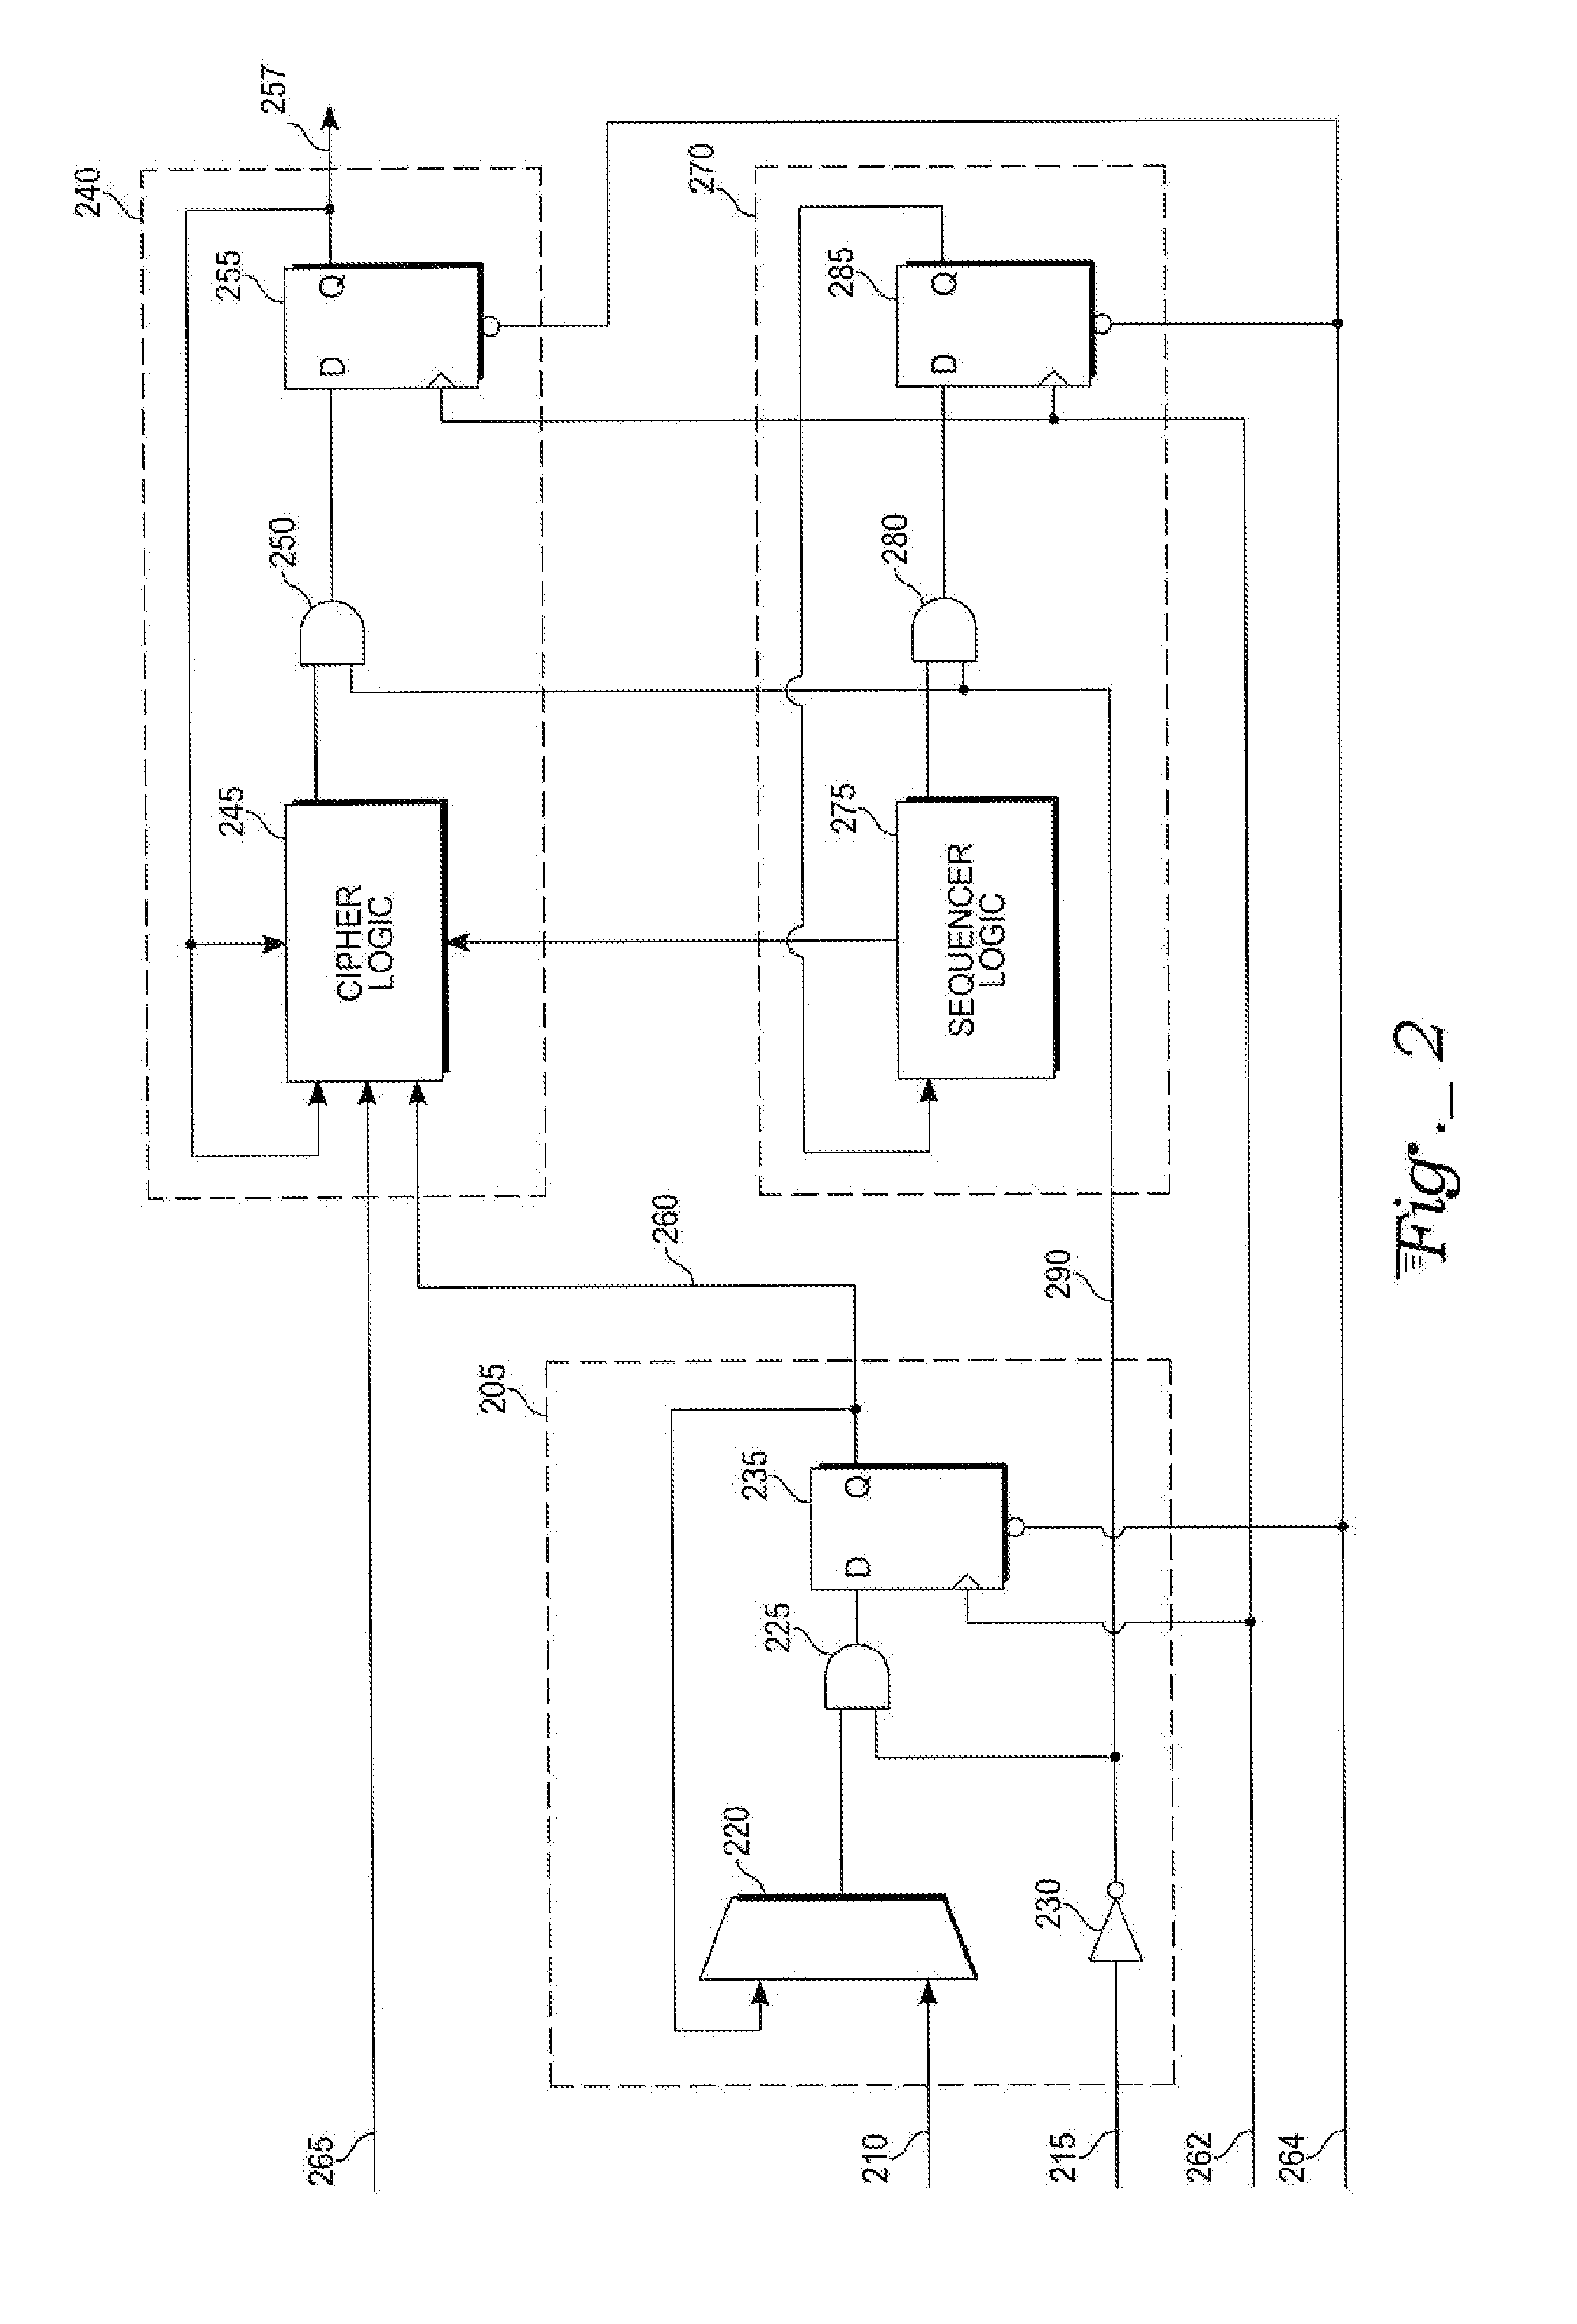 Apparatus and method for the detection of and recovery from inappropriate bus access in microcontroller circuits